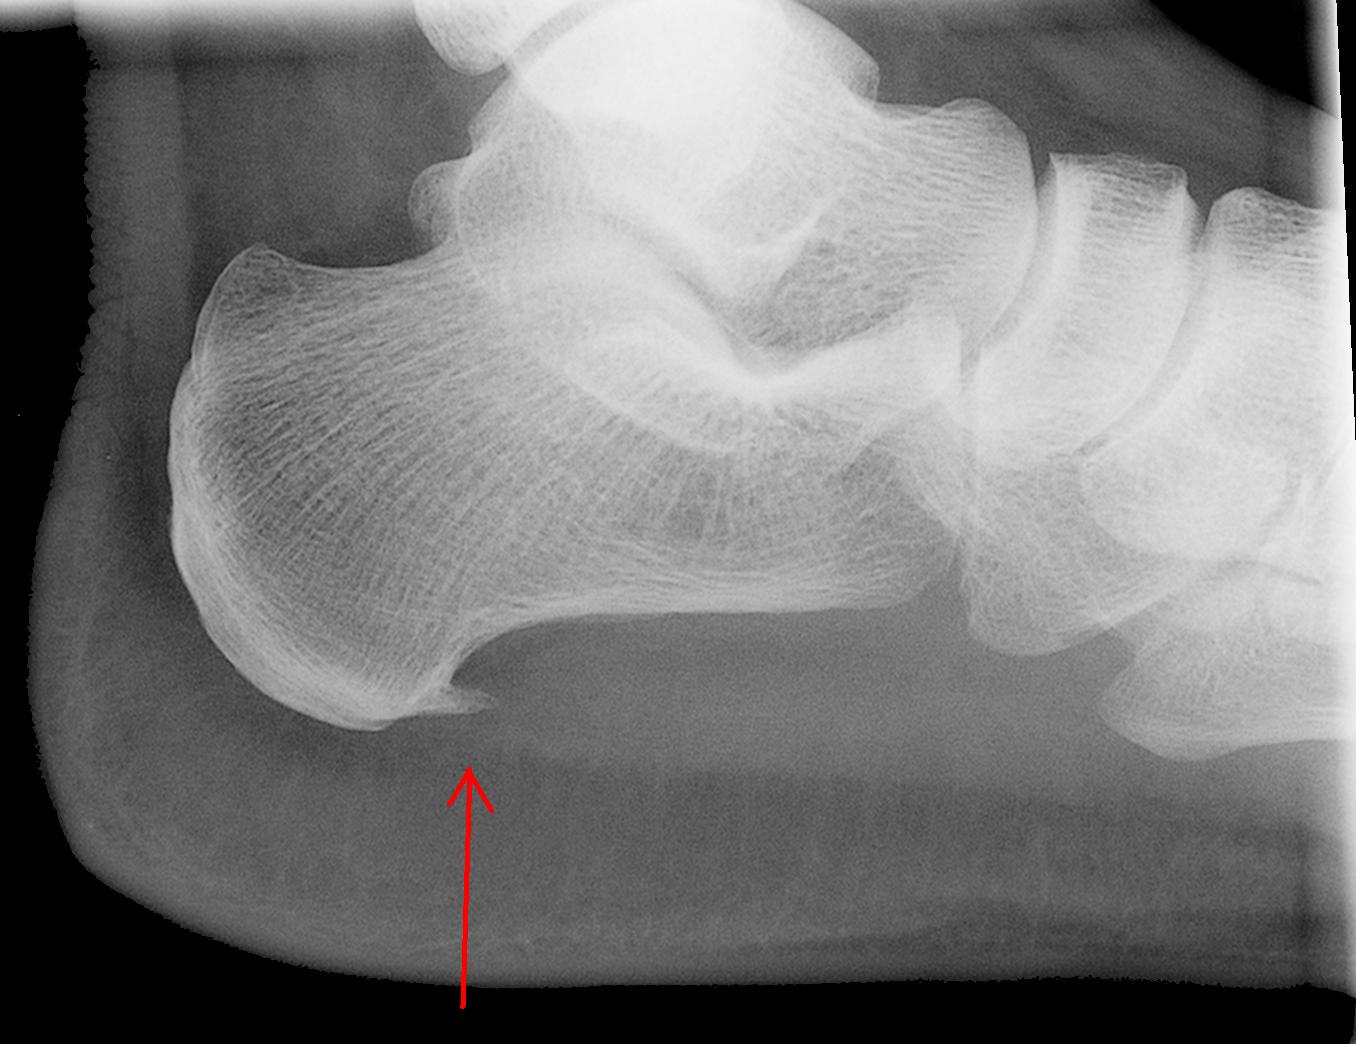 projectional_radiography_of_calcaneal_spurjpg